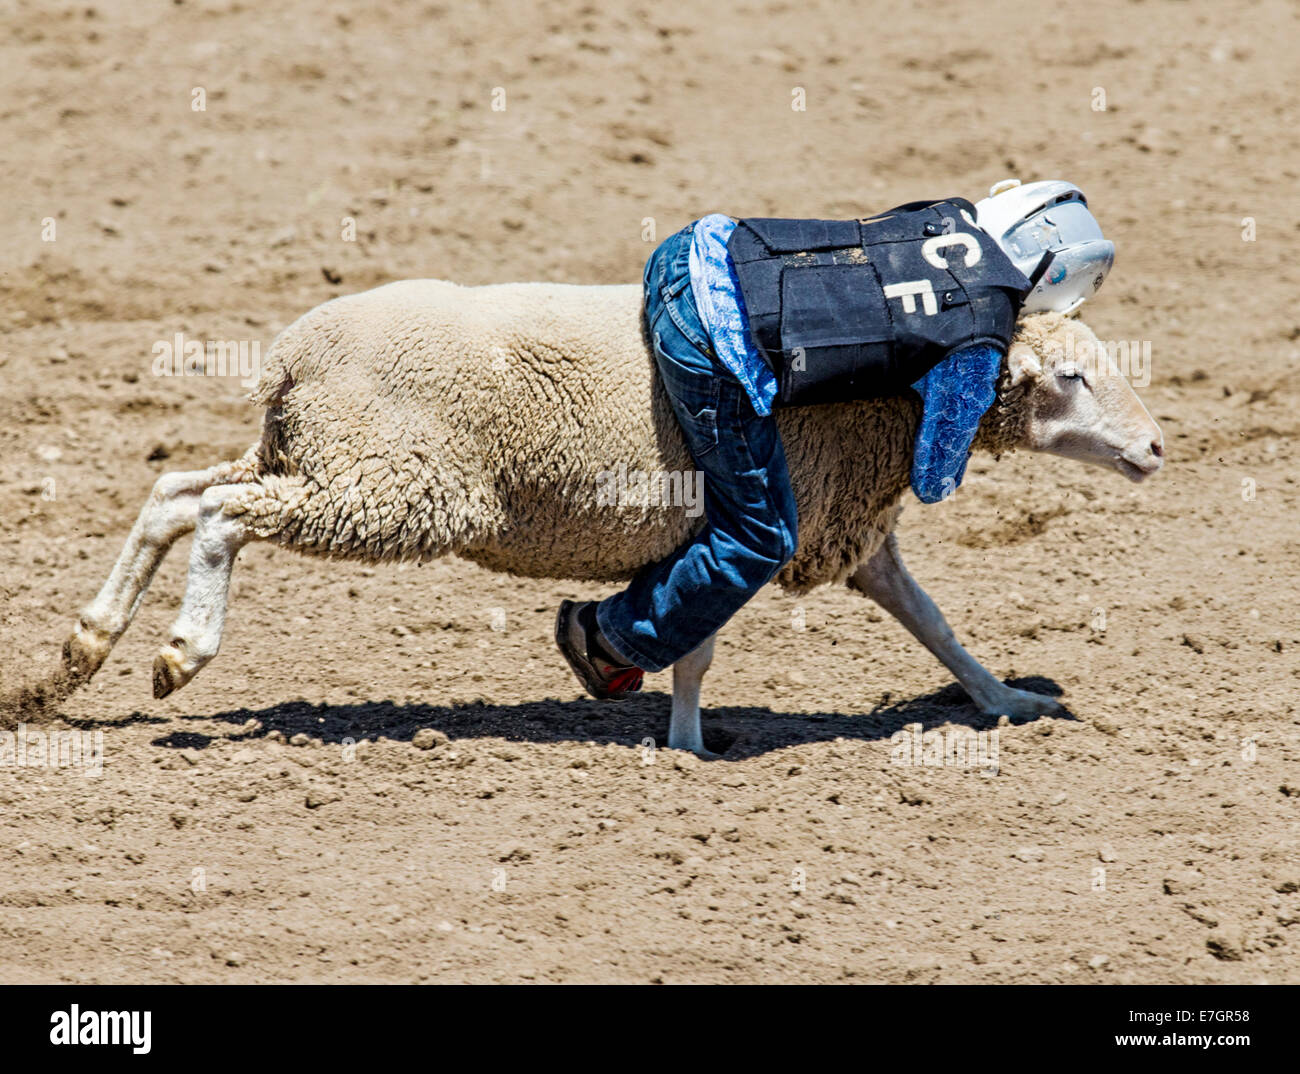 Young child riding a sheep in the mutton busting competition event, Chaffee County Fair & Rodeo Stock Photo